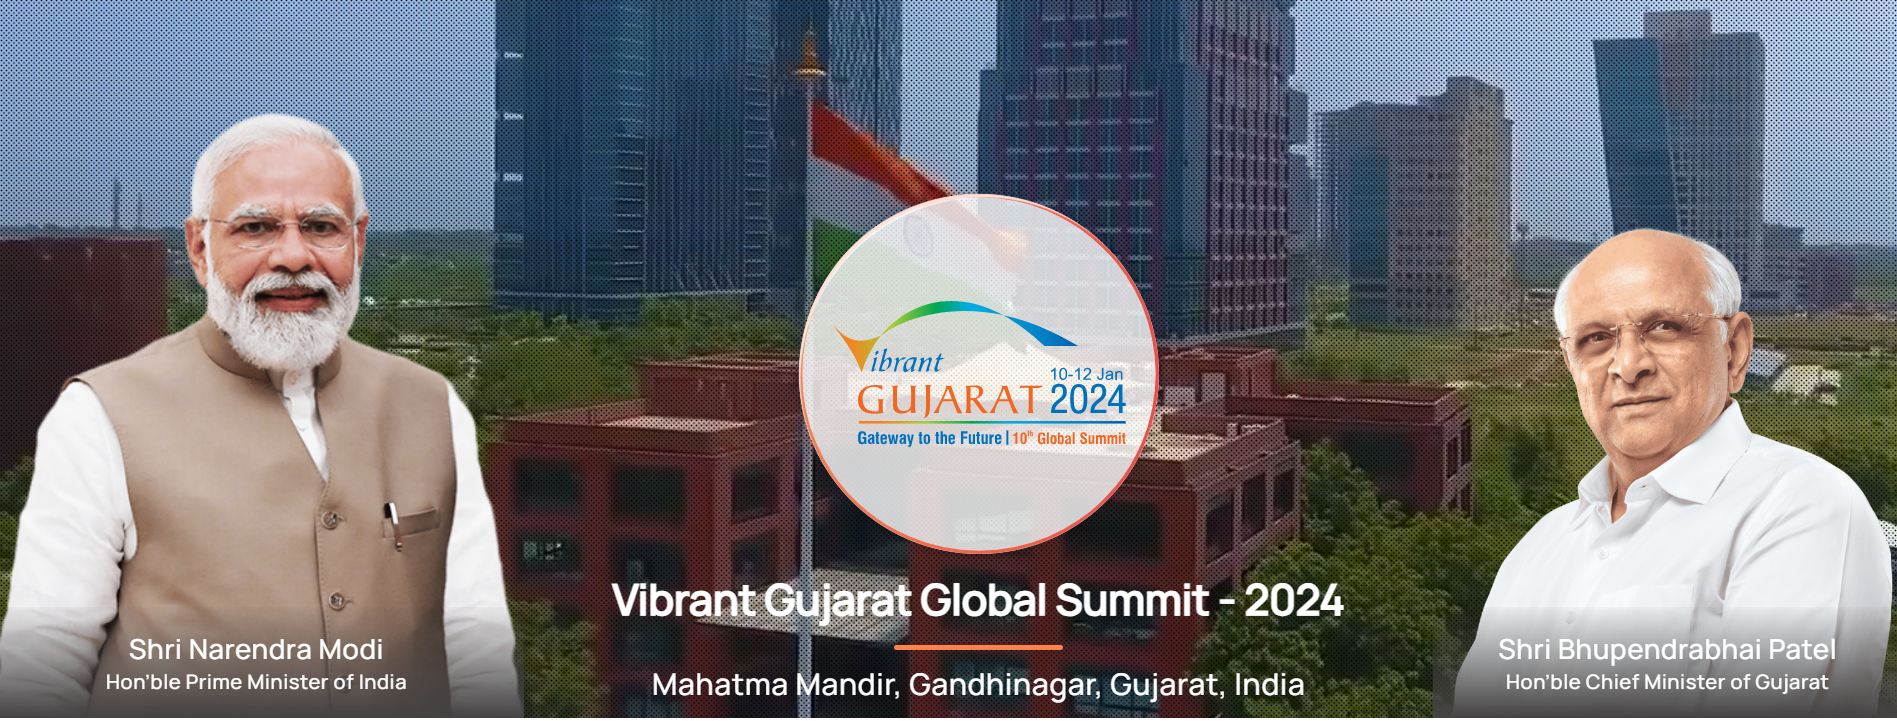 Networking Opportunities at Vibrant Gujarat 2024: A Student’s Guide